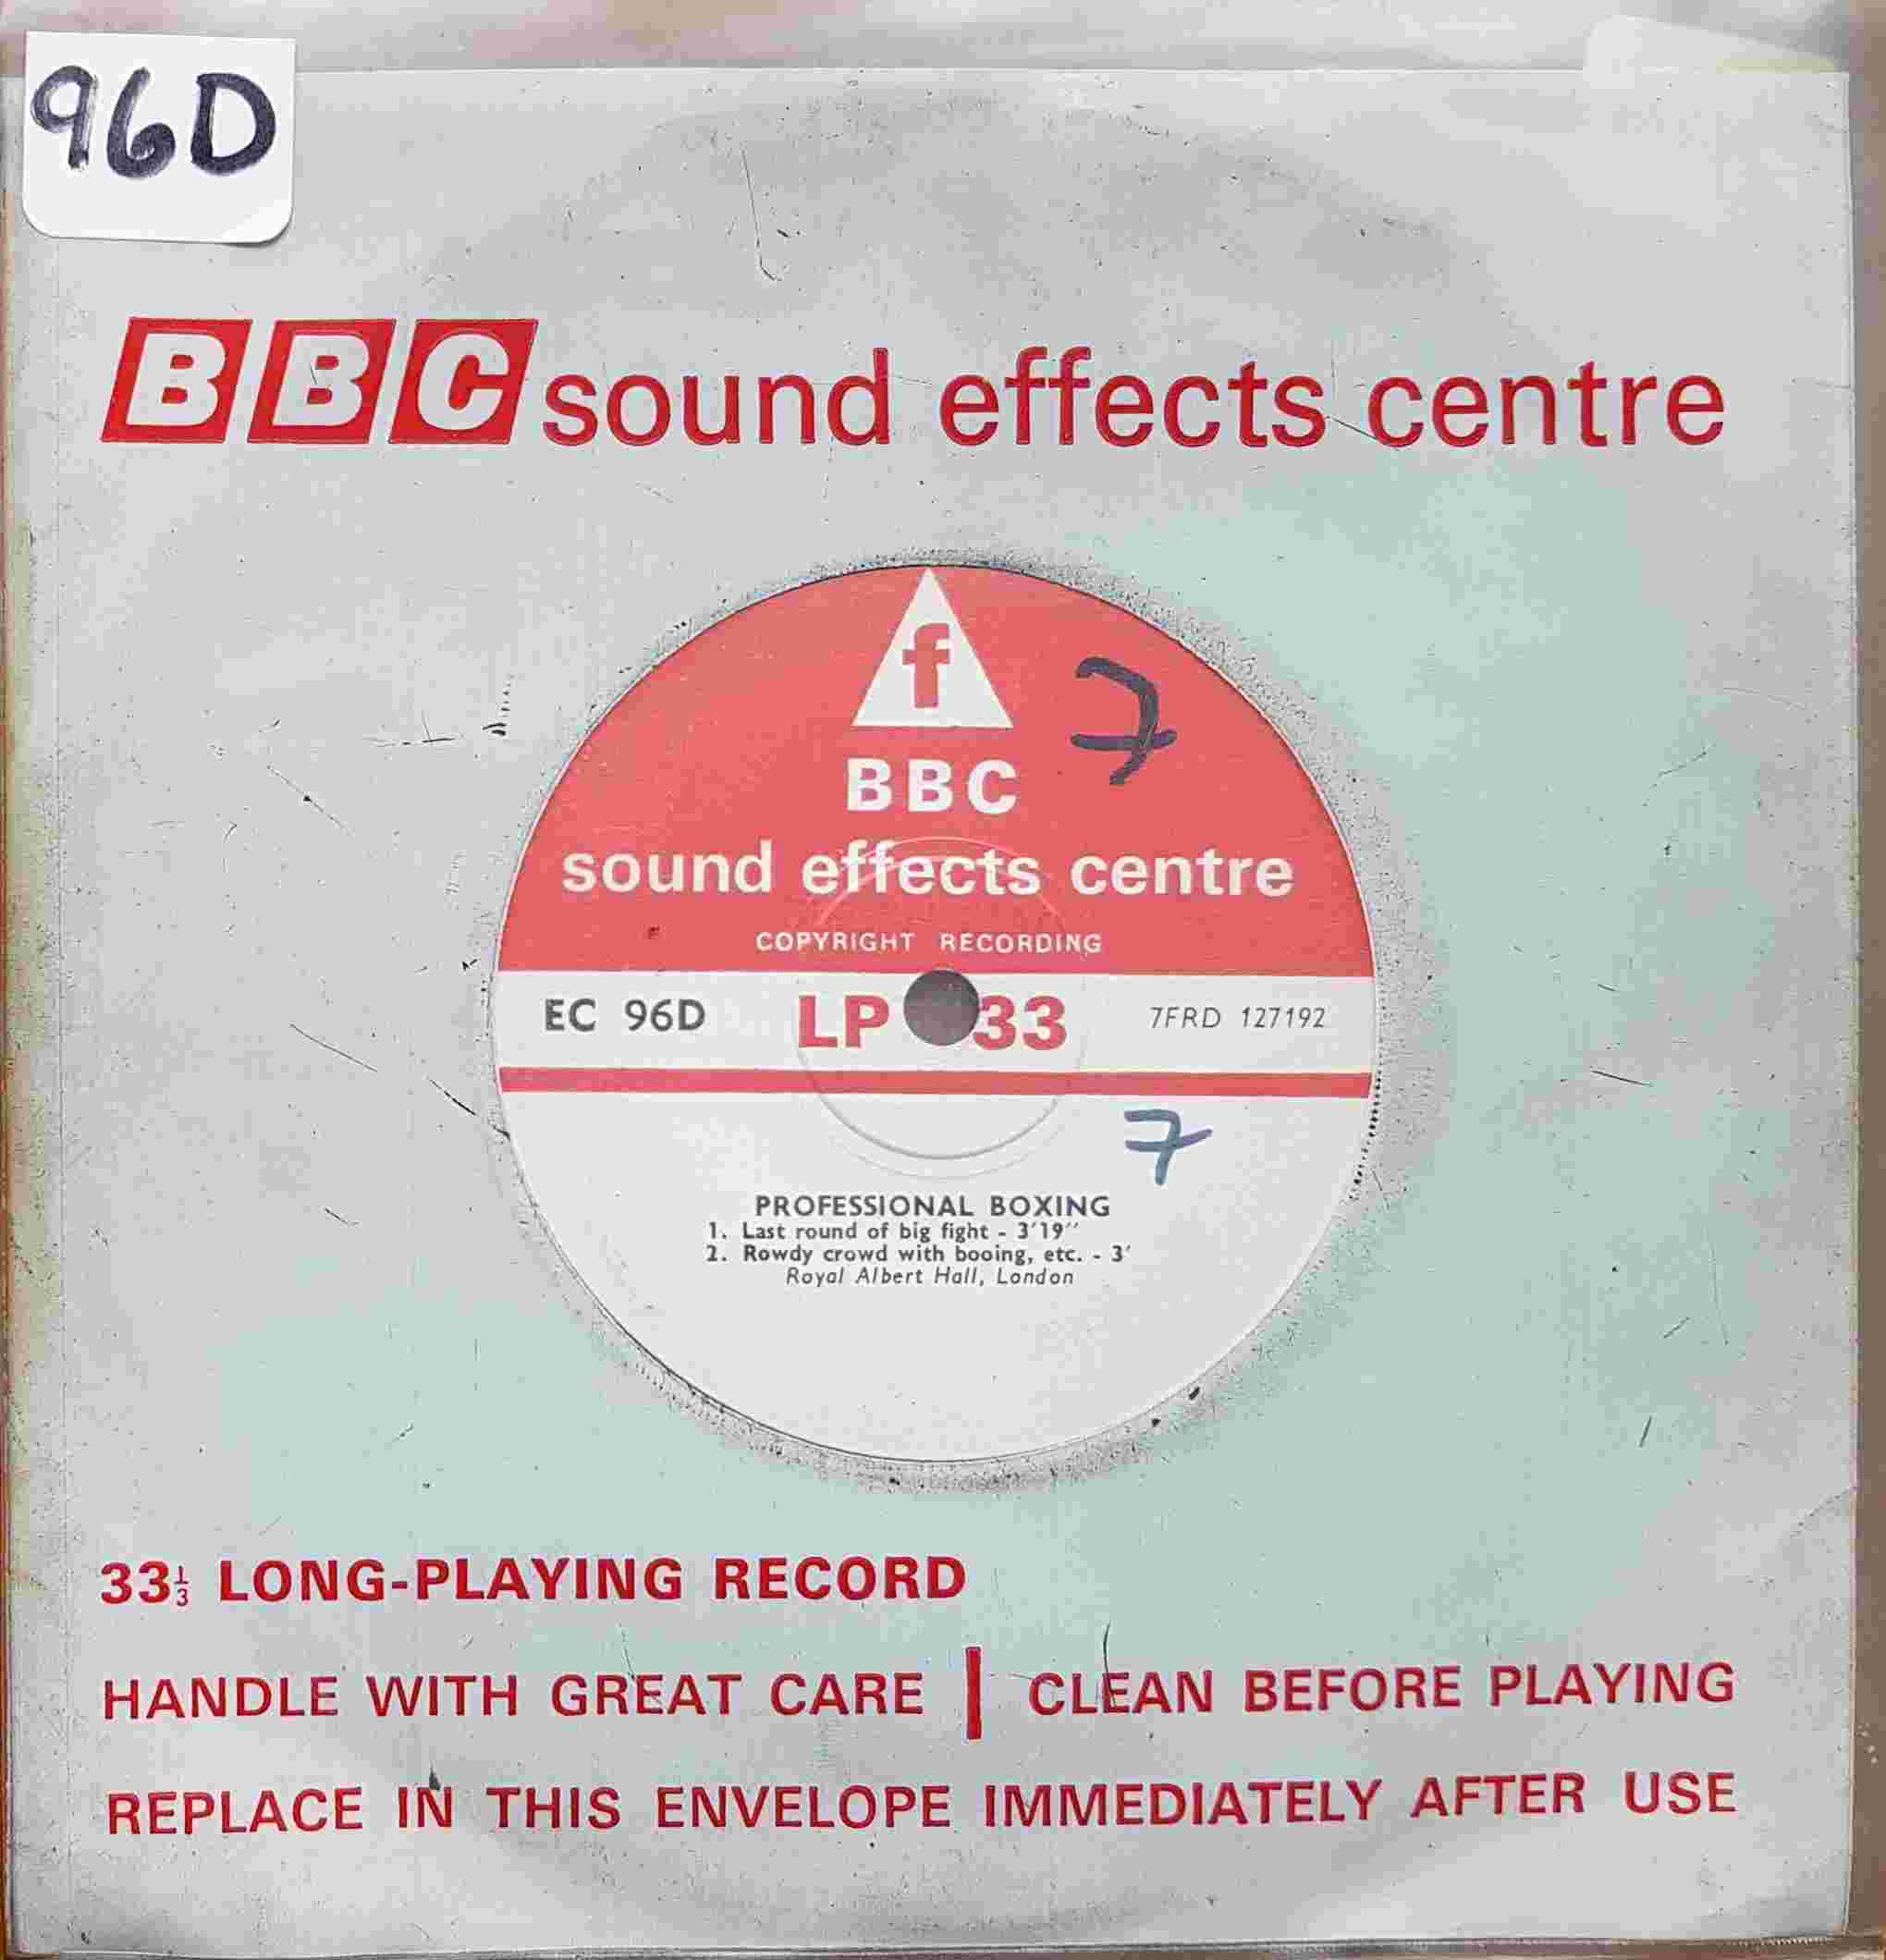 Picture of EC 96D Professional boxing - Royal Albert Hall, London by artist Not registered from the BBC records and Tapes library